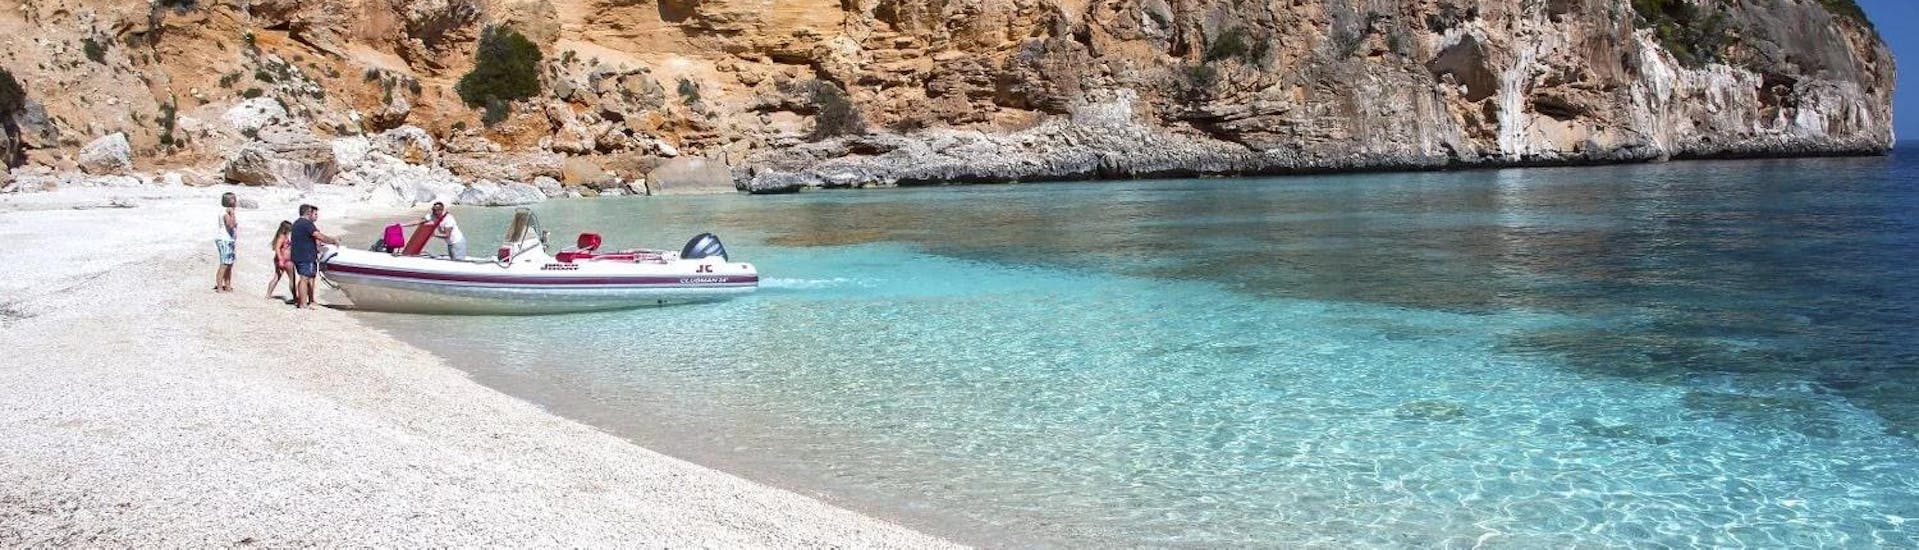 The golden beach that you can visit with the rib boat rental in Cala Gonone up to 10 people with Dovesesto Cala Gonone.